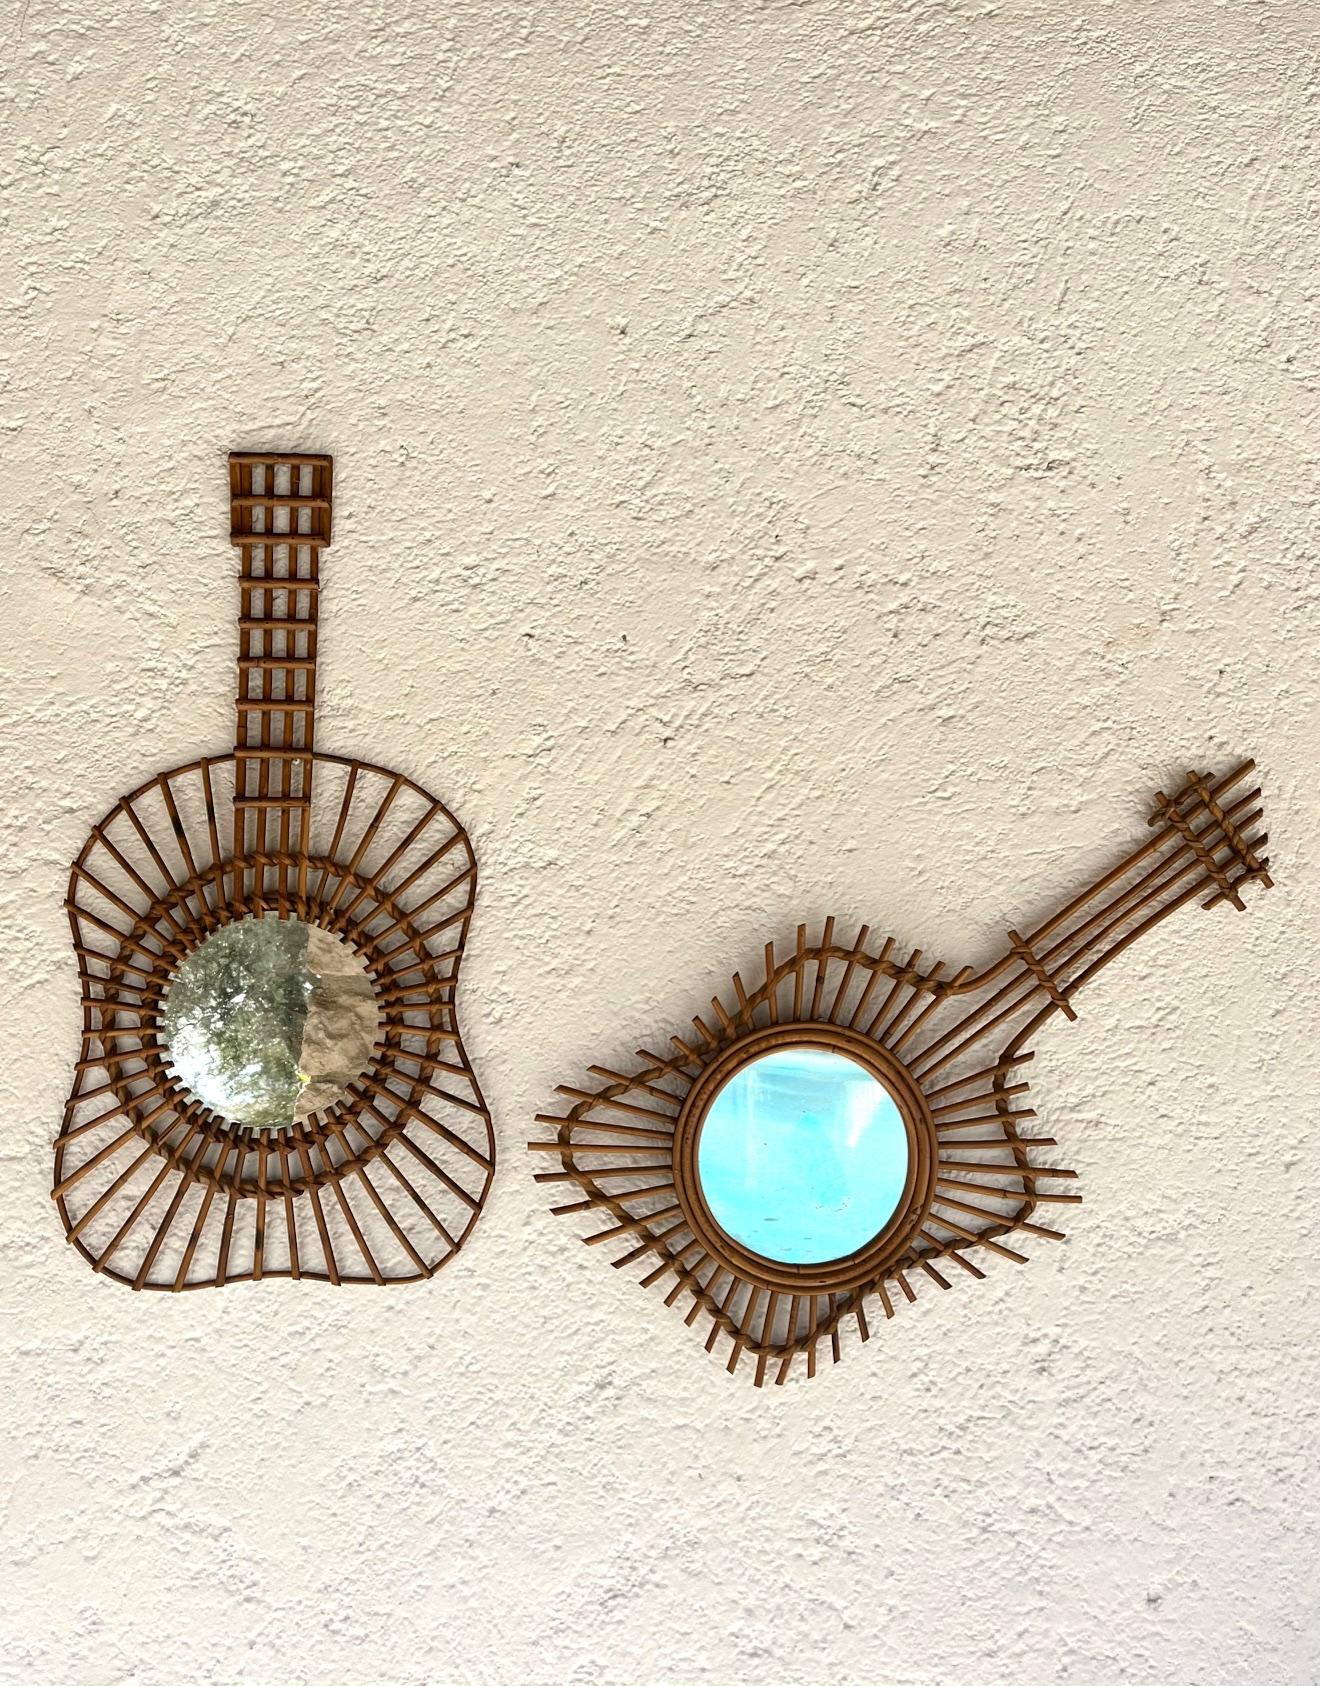 Unusual set of 2  wall mirrors,  France, 1950's. 
The  hand-crafted rattan frames are in the shape of  guitares 
This  highly decorative set of mirrors is evocative of the 